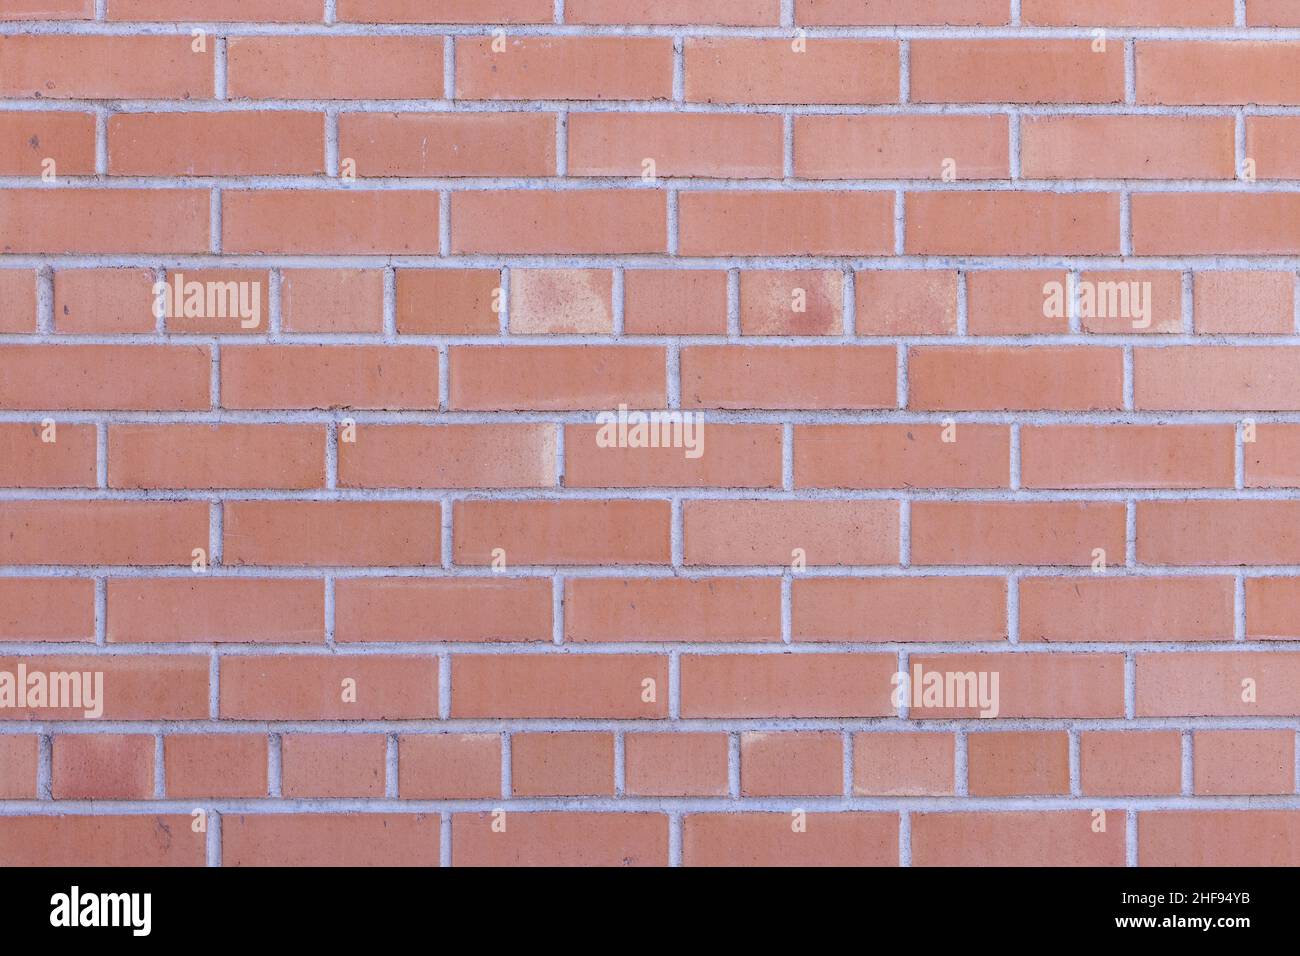 Layed bricks as a background wall with variegated colors Stock Photo